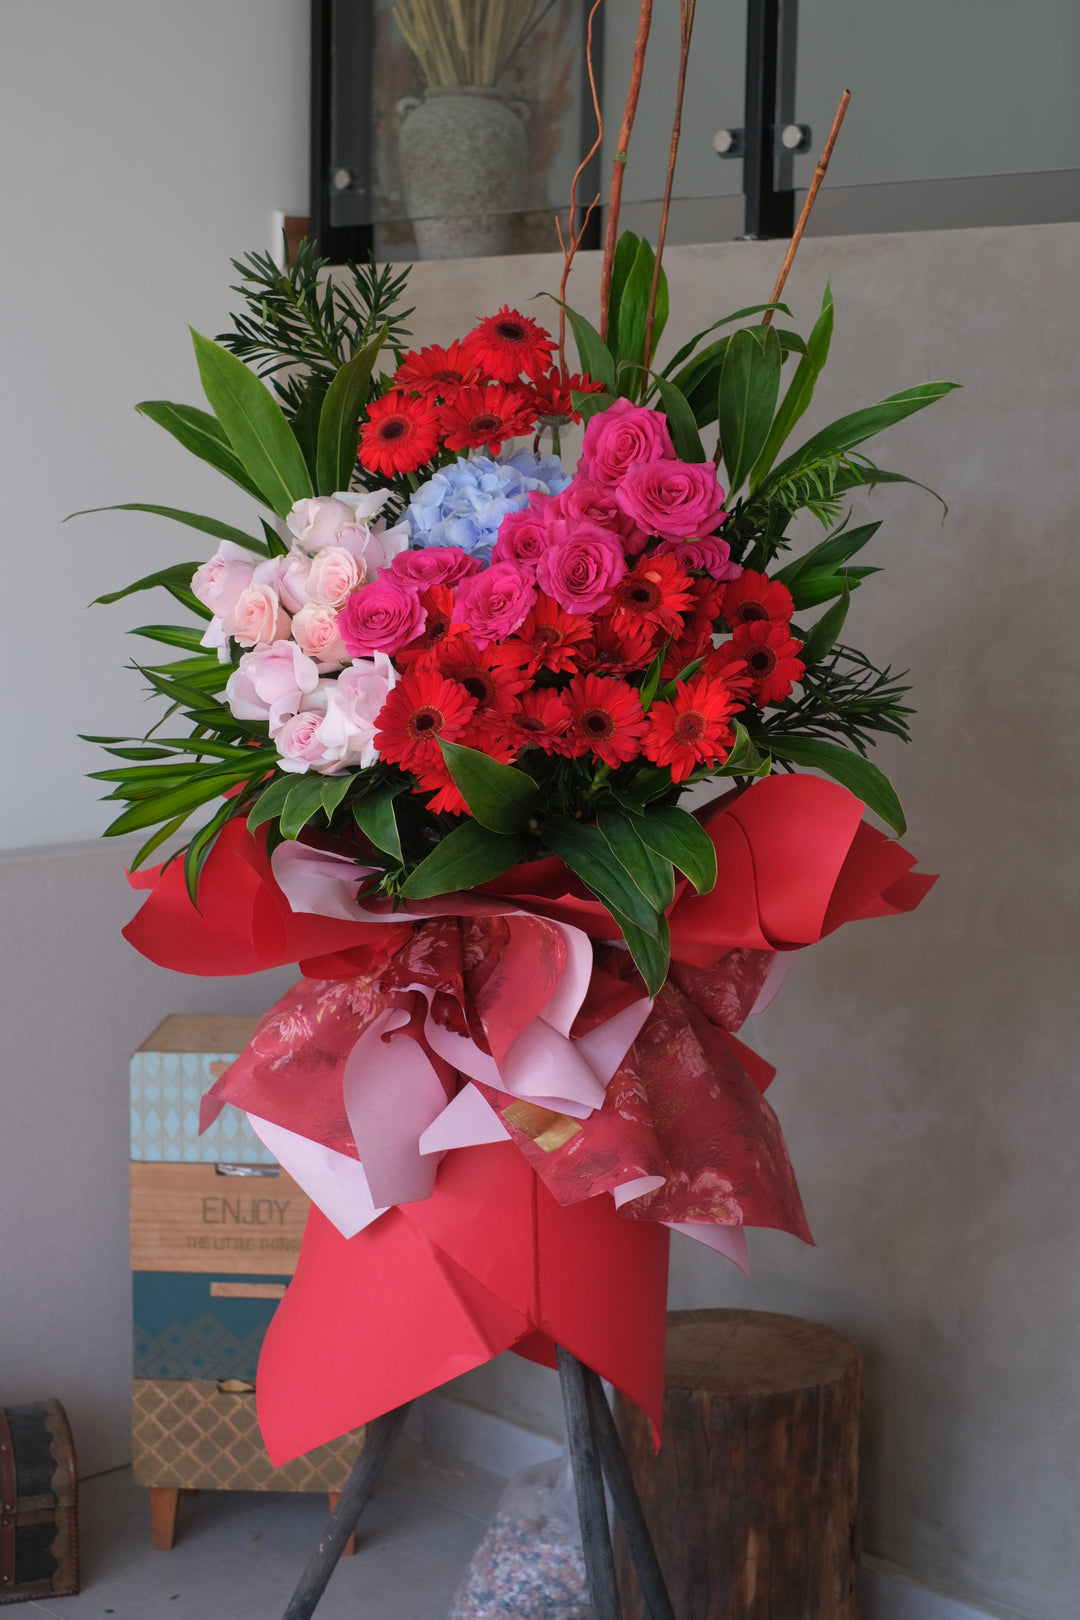 grand opening flower, florist bukit mertajam with bouquet delivery penang, hydrangeas with baby pink roses, baribie, hot pink roses in red paper wripping paper